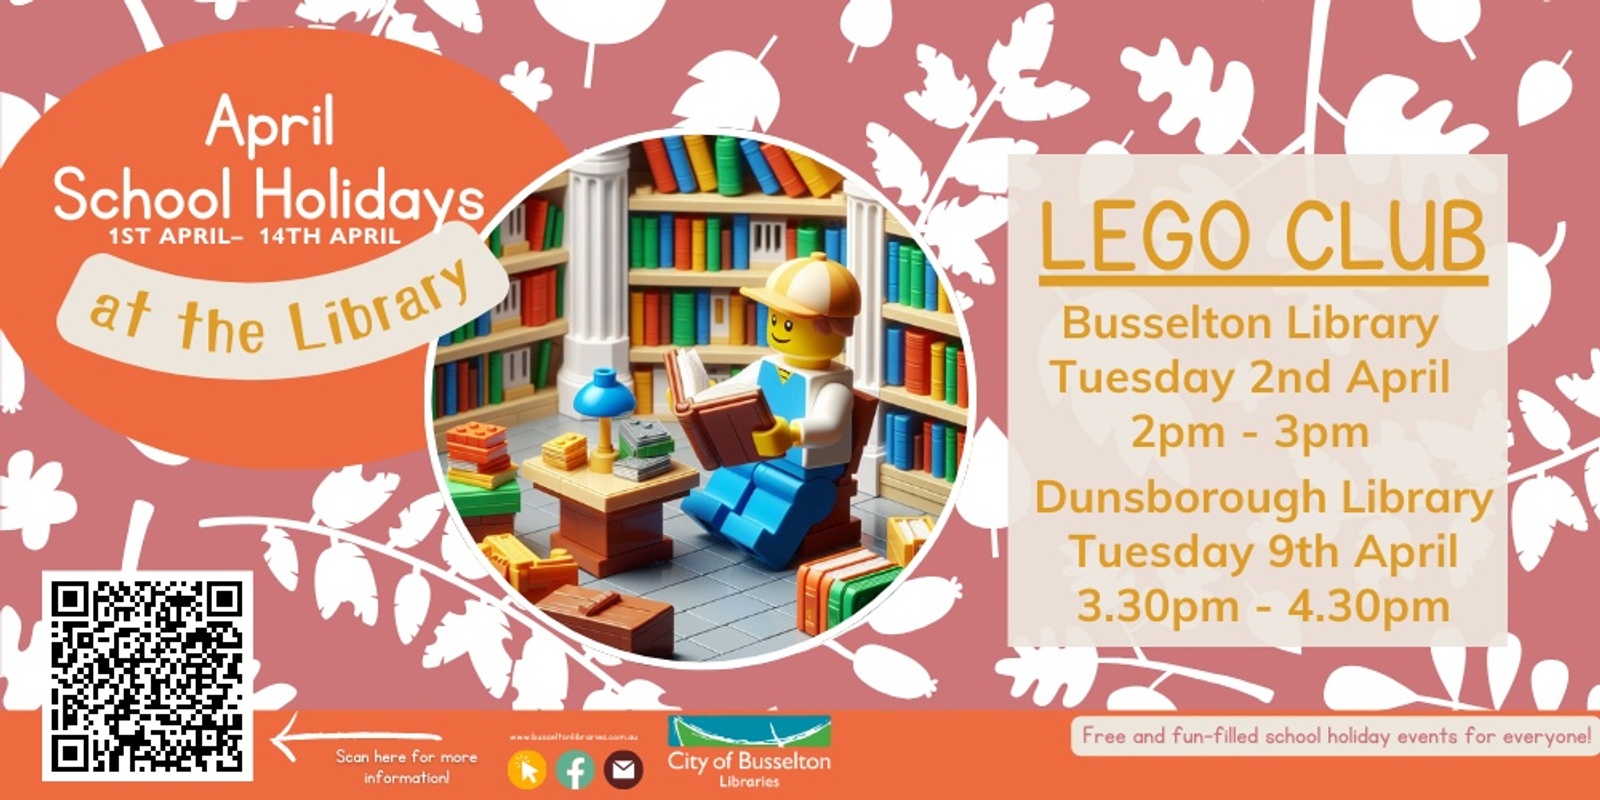 Banner image for Lego Club @ Busselton Library